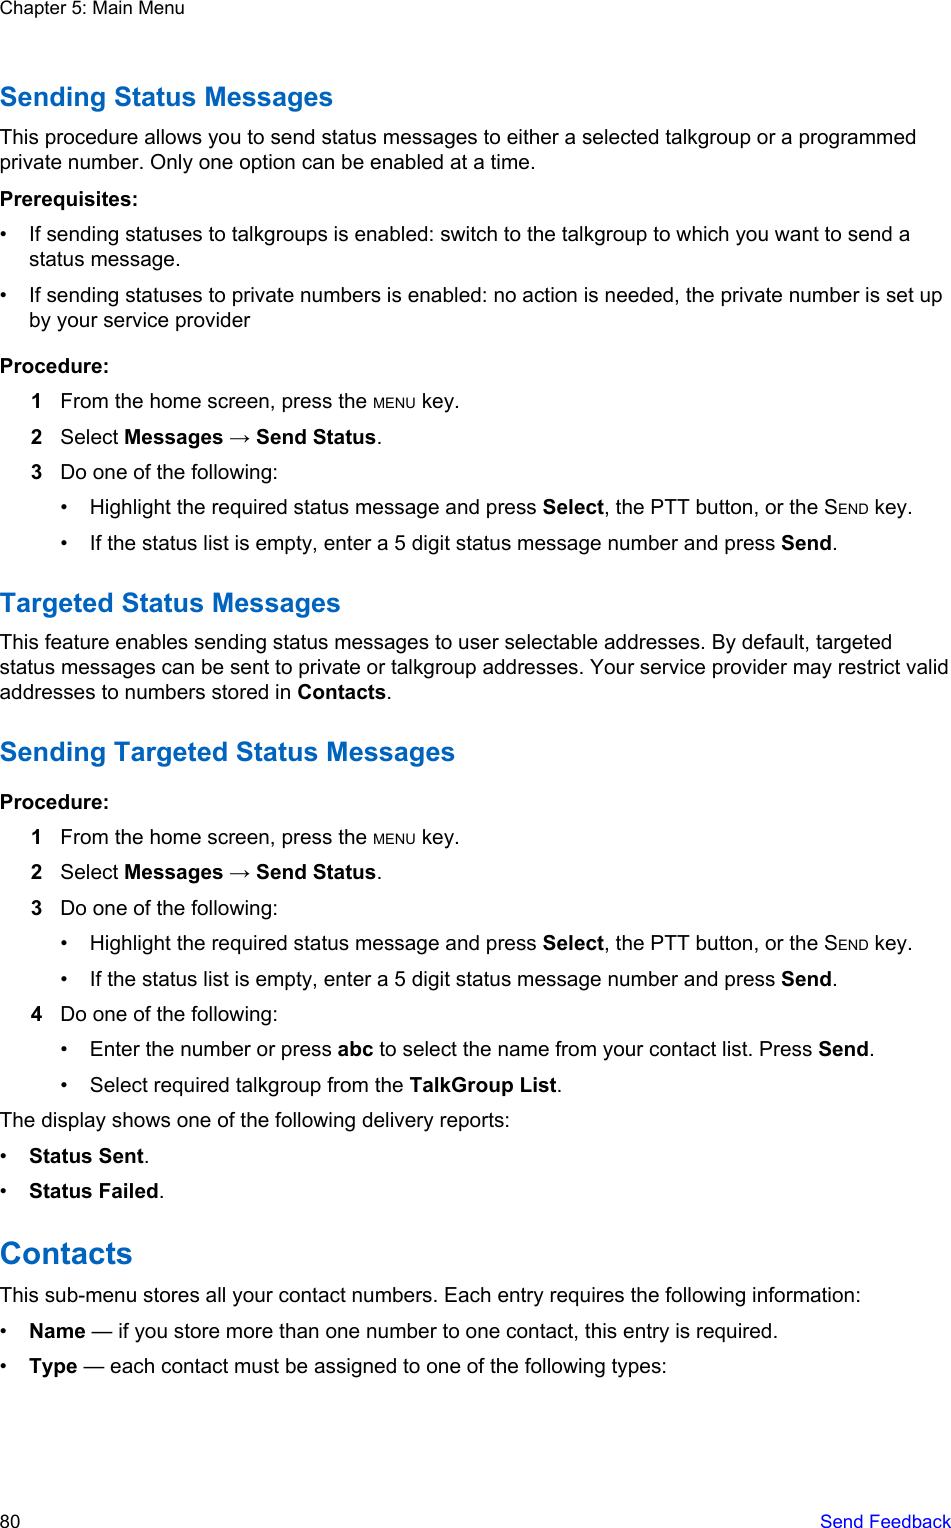 Sending Status MessagesThis procedure allows you to send status messages to either a selected talkgroup or a programmedprivate number. Only one option can be enabled at a time.Prerequisites:• If sending statuses to talkgroups is enabled: switch to the talkgroup to which you want to send astatus message.• If sending statuses to private numbers is enabled: no action is needed, the private number is set upby your service providerProcedure:1From the home screen, press the MENU key.2Select Messages → Send Status.3Do one of the following:• Highlight the required status message and press Select, the PTT button, or the SEND key.• If the status list is empty, enter a 5 digit status message number and press Send.Targeted Status MessagesThis feature enables sending status messages to user selectable addresses. By default, targetedstatus messages can be sent to private or talkgroup addresses. Your service provider may restrict validaddresses to numbers stored in Contacts.Sending Targeted Status MessagesProcedure:1From the home screen, press the MENU key.2Select Messages → Send Status.3Do one of the following:• Highlight the required status message and press Select, the PTT button, or the SEND key.• If the status list is empty, enter a 5 digit status message number and press Send.4Do one of the following:• Enter the number or press abc to select the name from your contact list. Press Send.• Select required talkgroup from the TalkGroup List.The display shows one of the following delivery reports:•Status Sent.•Status Failed.ContactsThis sub-menu stores all your contact numbers. Each entry requires the following information:•Name — if you store more than one number to one contact, this entry is required.•Type — each contact must be assigned to one of the following types:Chapter 5: Main Menu80   Send Feedback